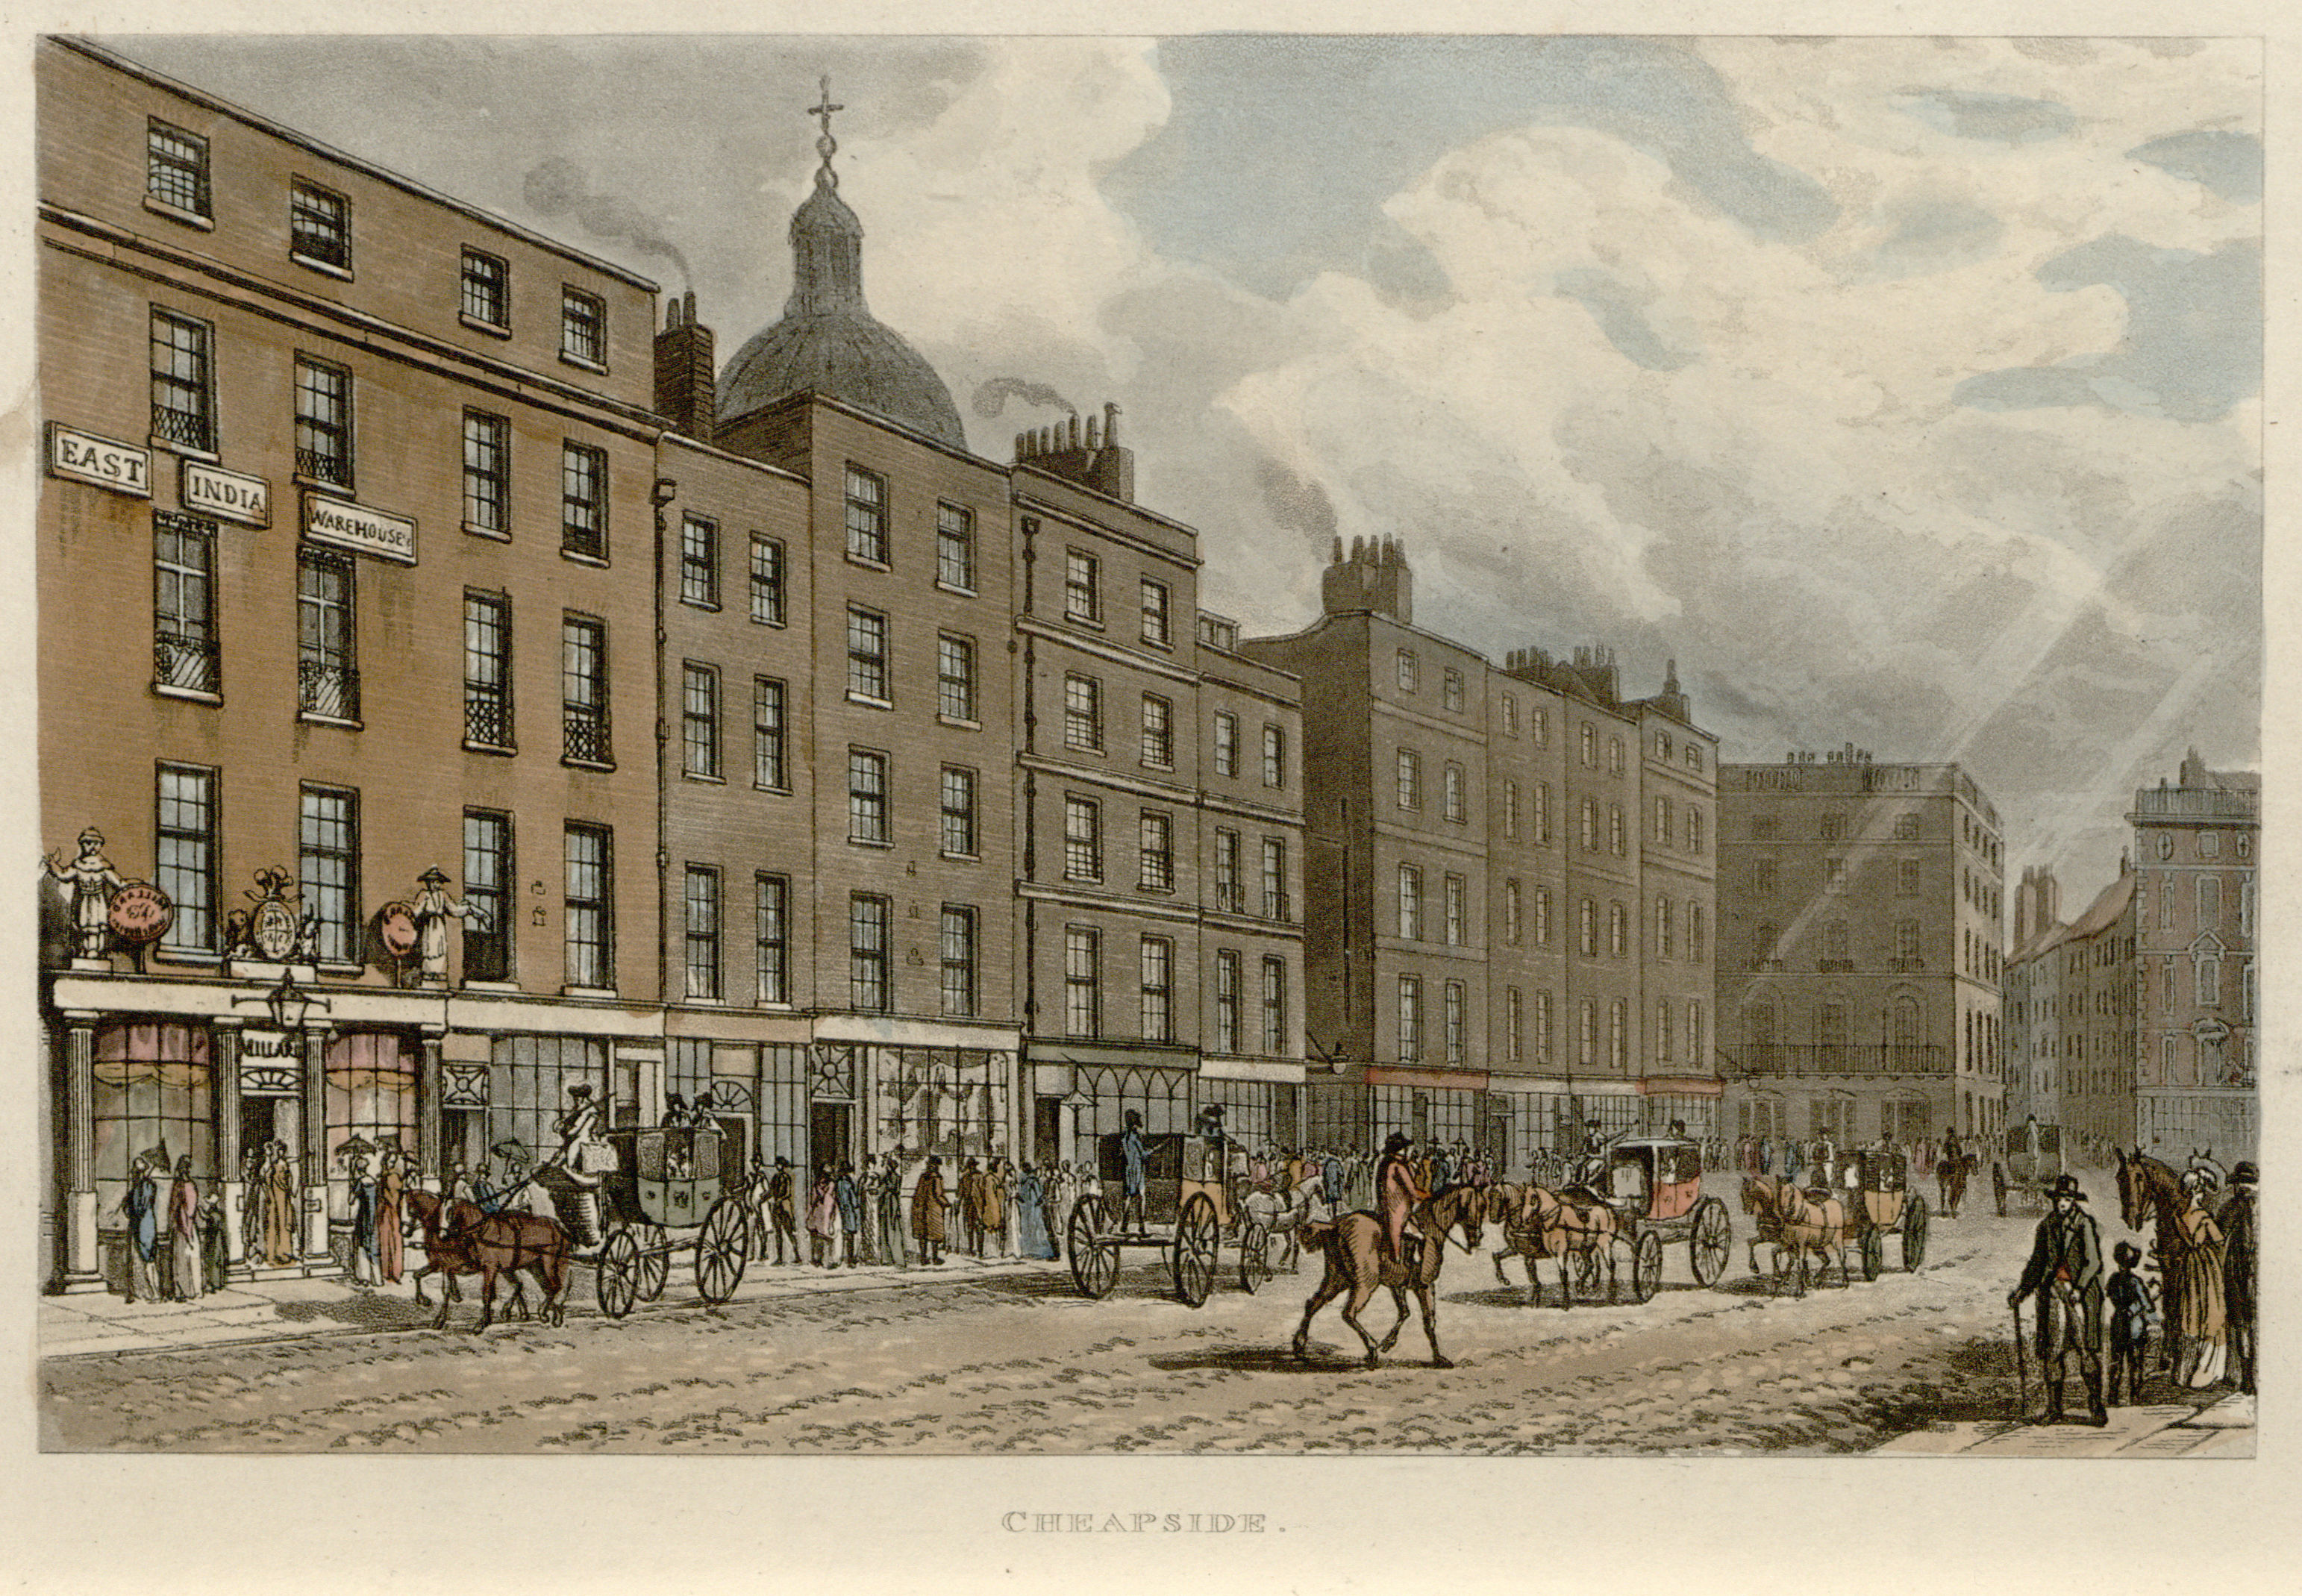 Cheapside, from Select Views of London, published by Rudolf Ackermann, 1816. Click to enlarge.